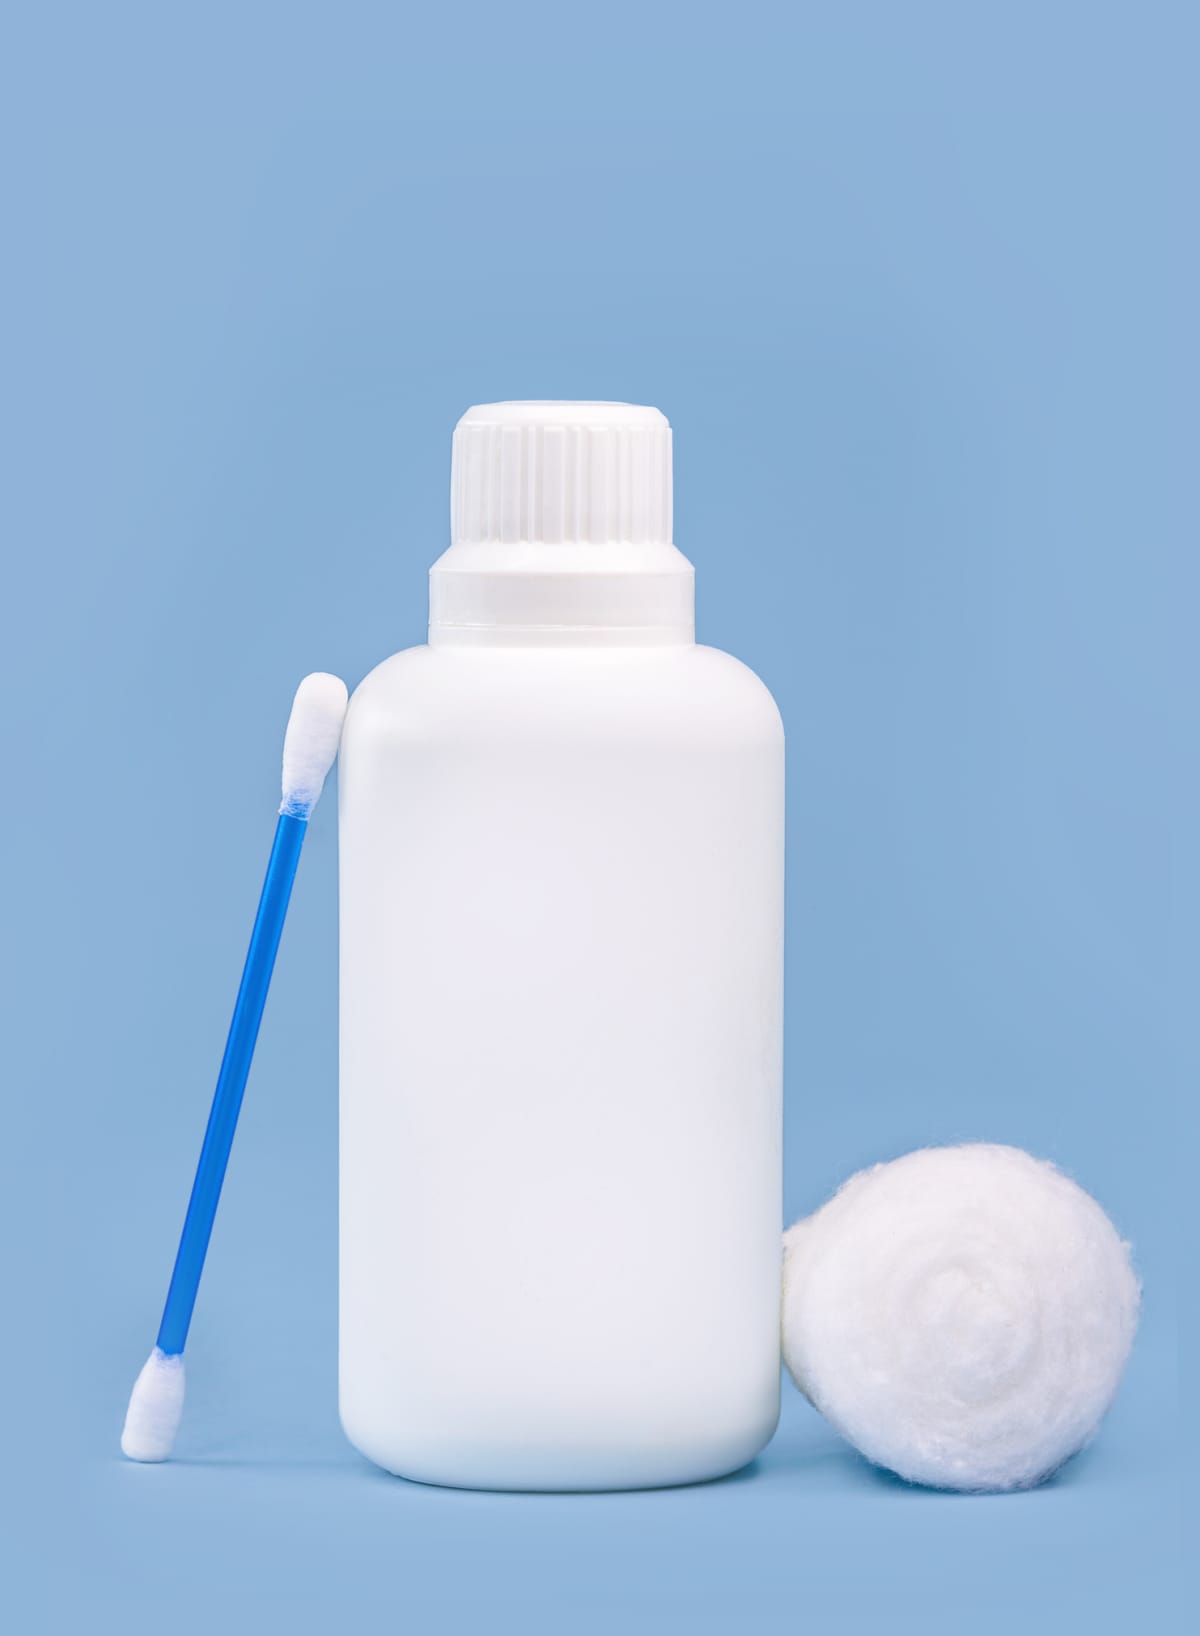 Hydrogen Peroxide next to cotton swab and cotton ball, blue background